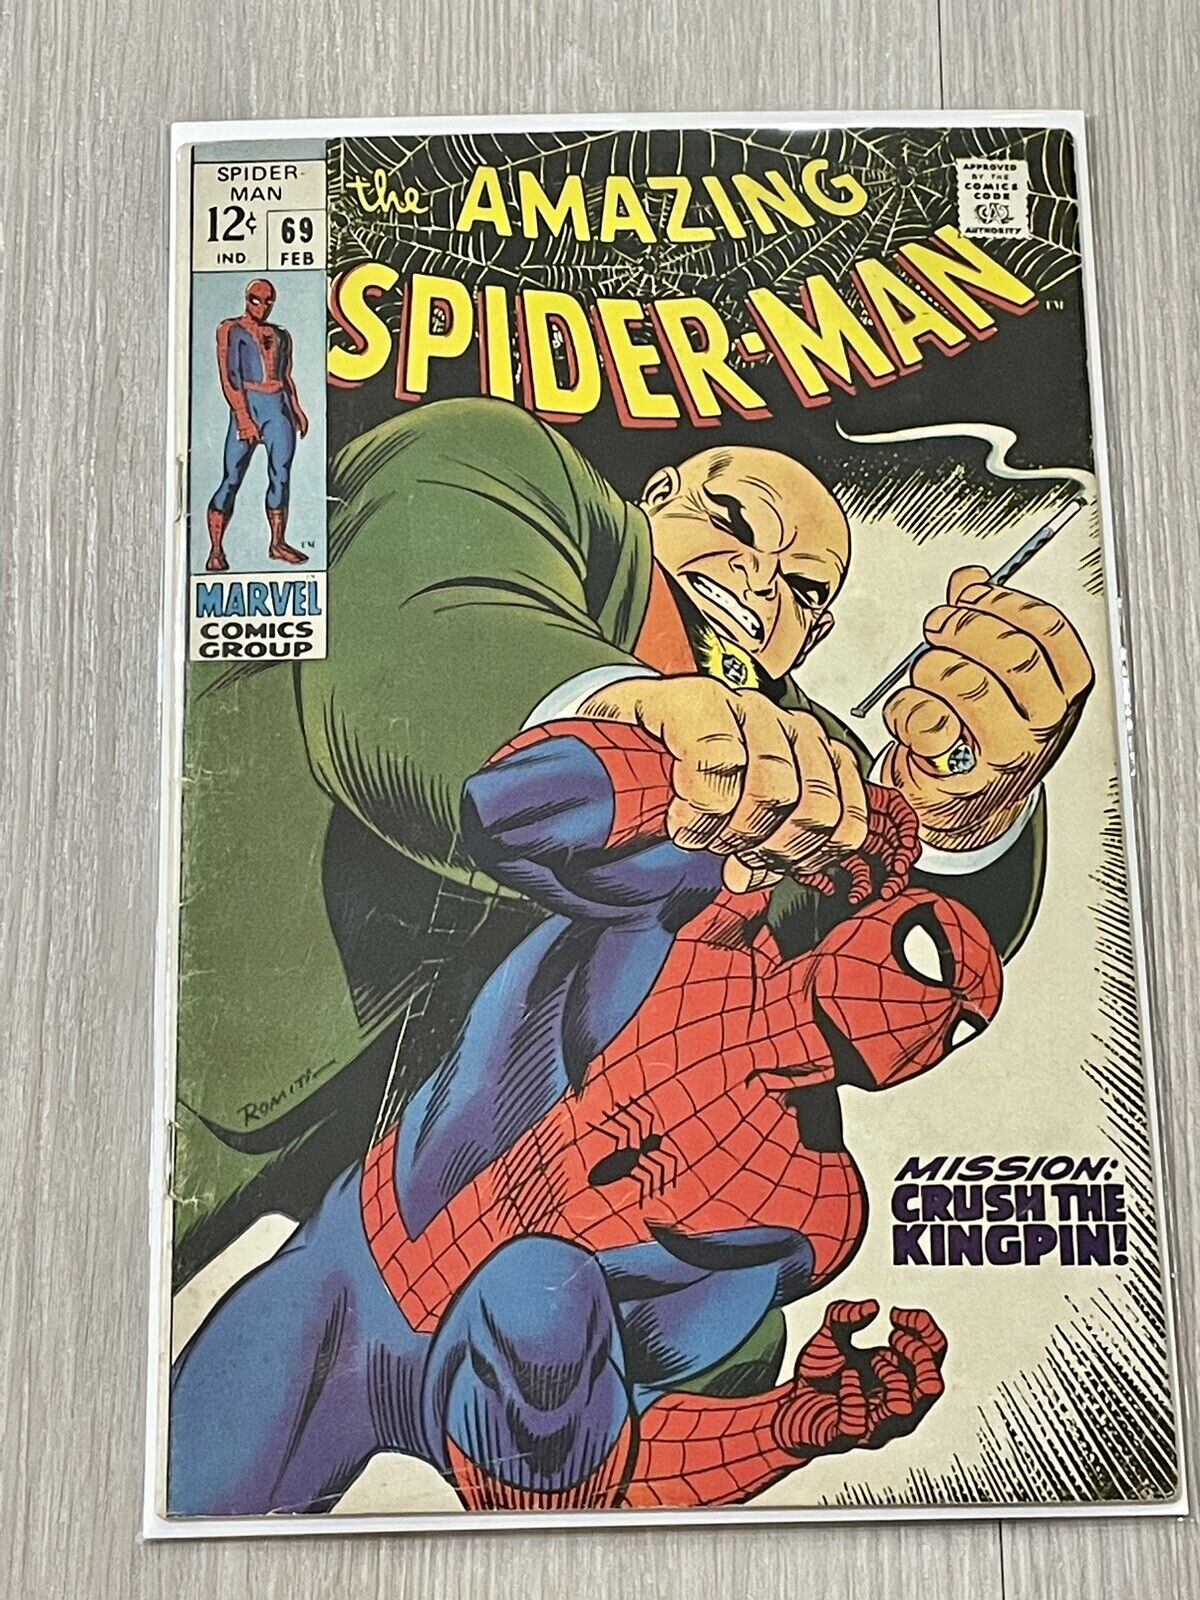 Amazing Spider-Man #69 MISSION: CRUSH THE KINGPIN 1969 Silver Age MARVEL Comic